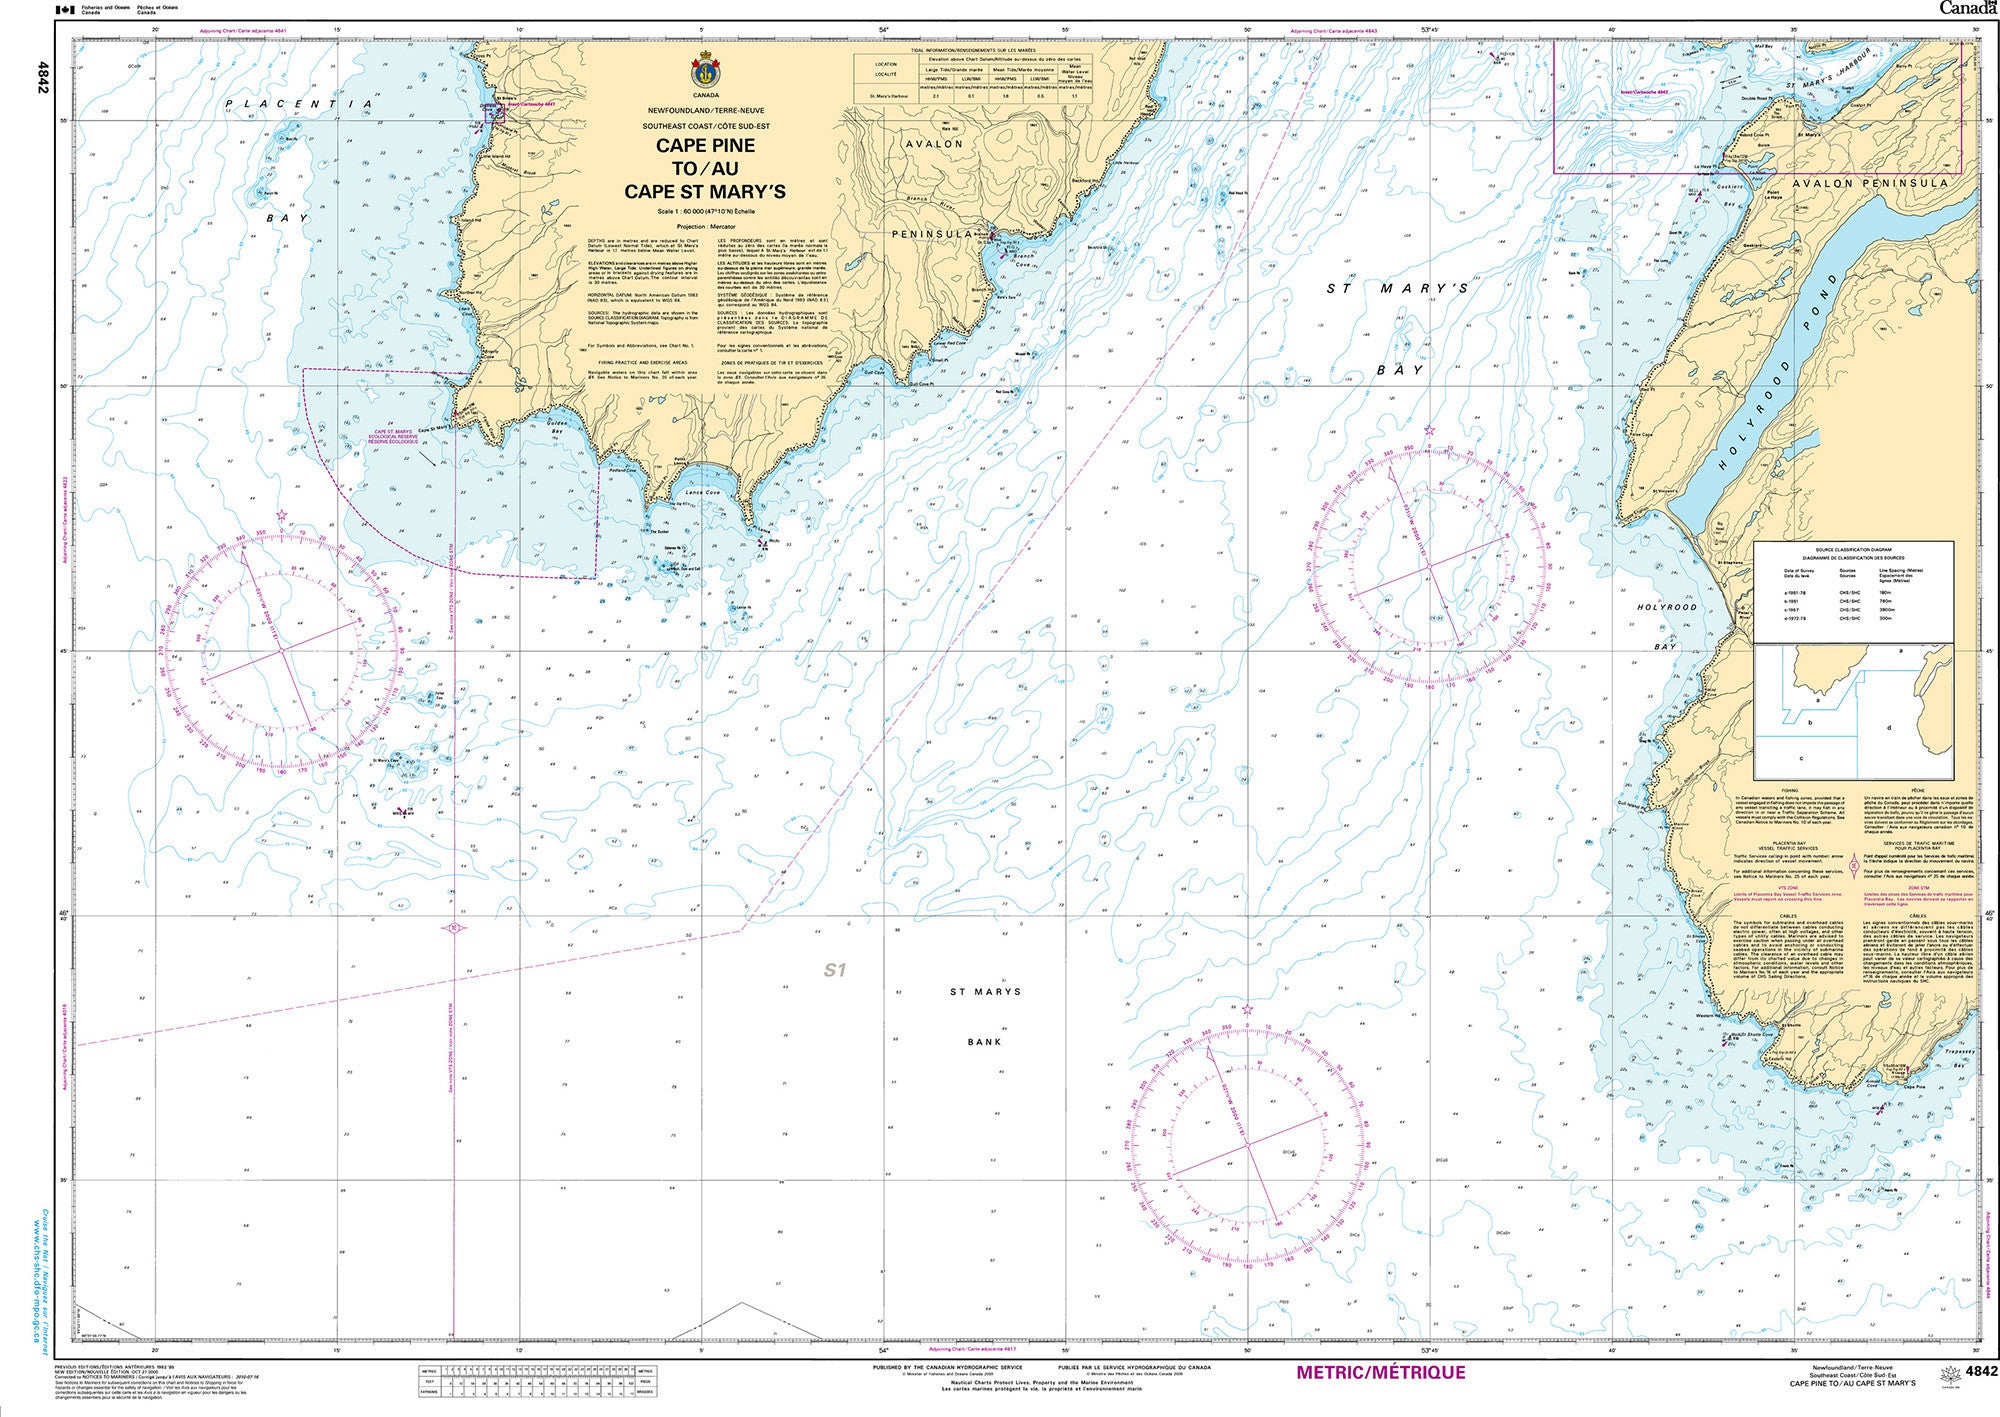 Canadian Hydrographic Service Nautical Chart CHS4842: Cape Pine to/au Cape St. Mary's